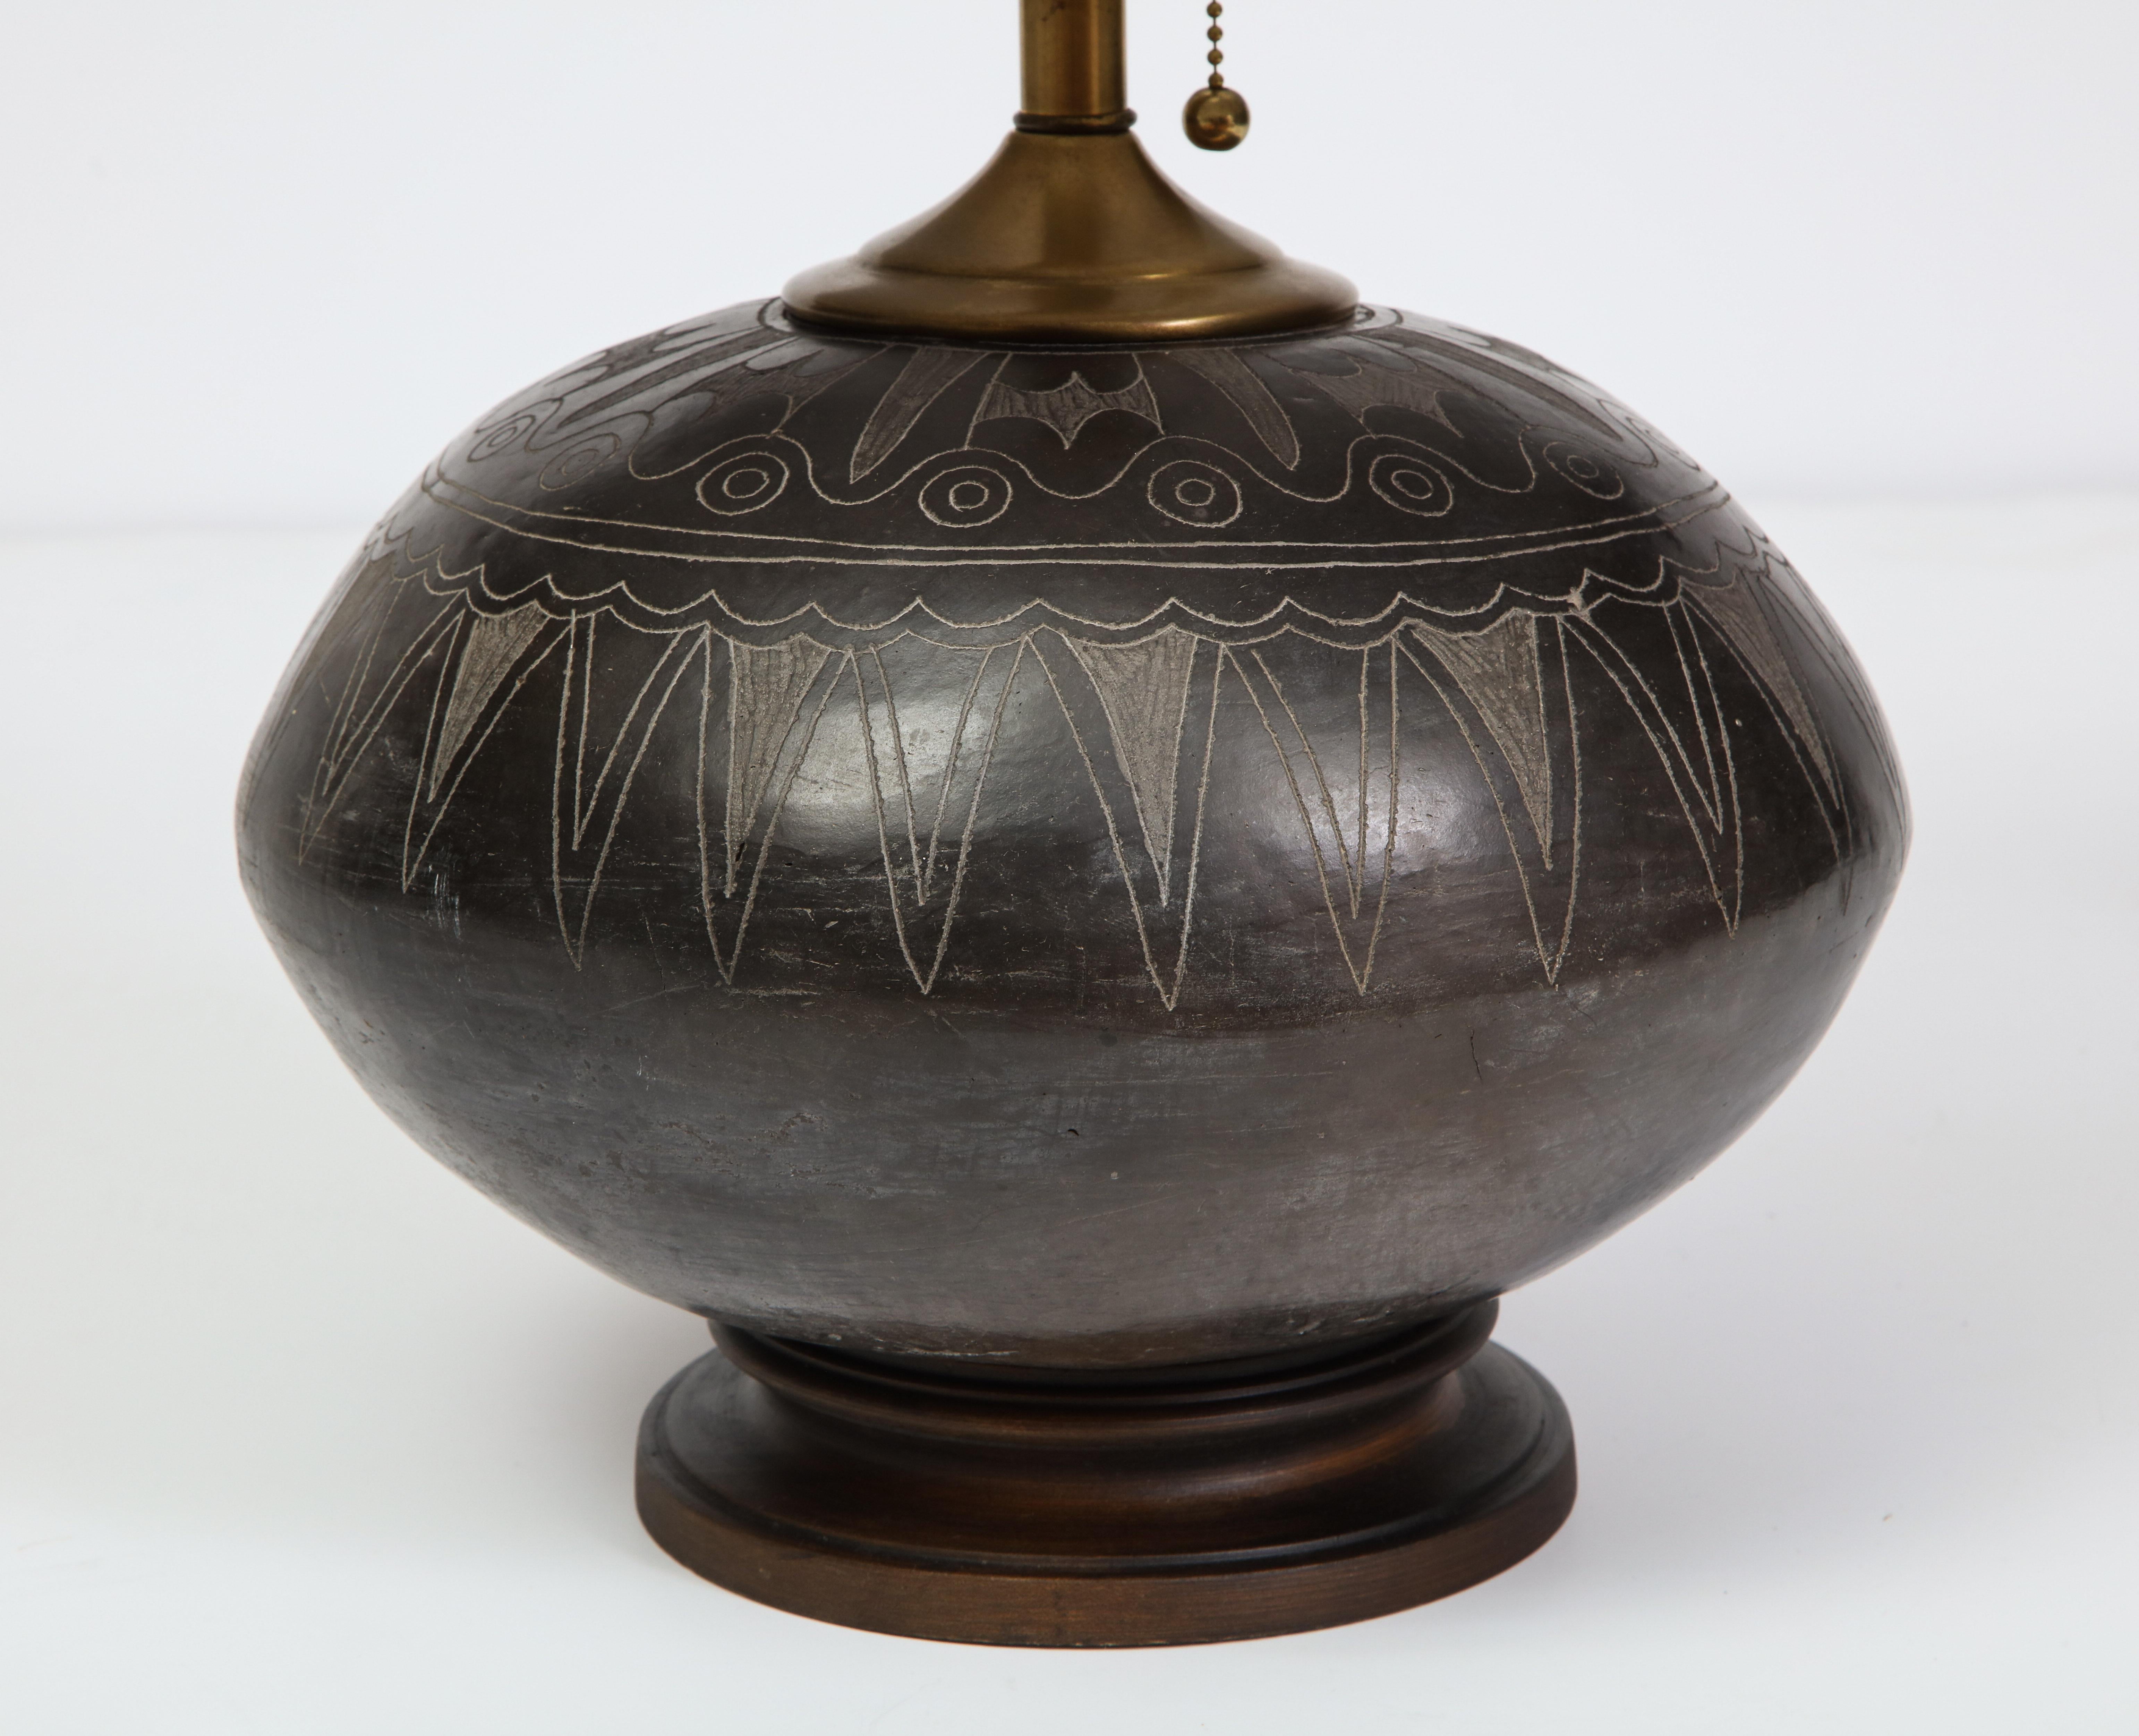 Hand carved Peruvian pottery table lamp from the 19th century, with a new pleated silk shade and natural stone finial. The pottery base is in impeccable condition for its age. Shade is 14